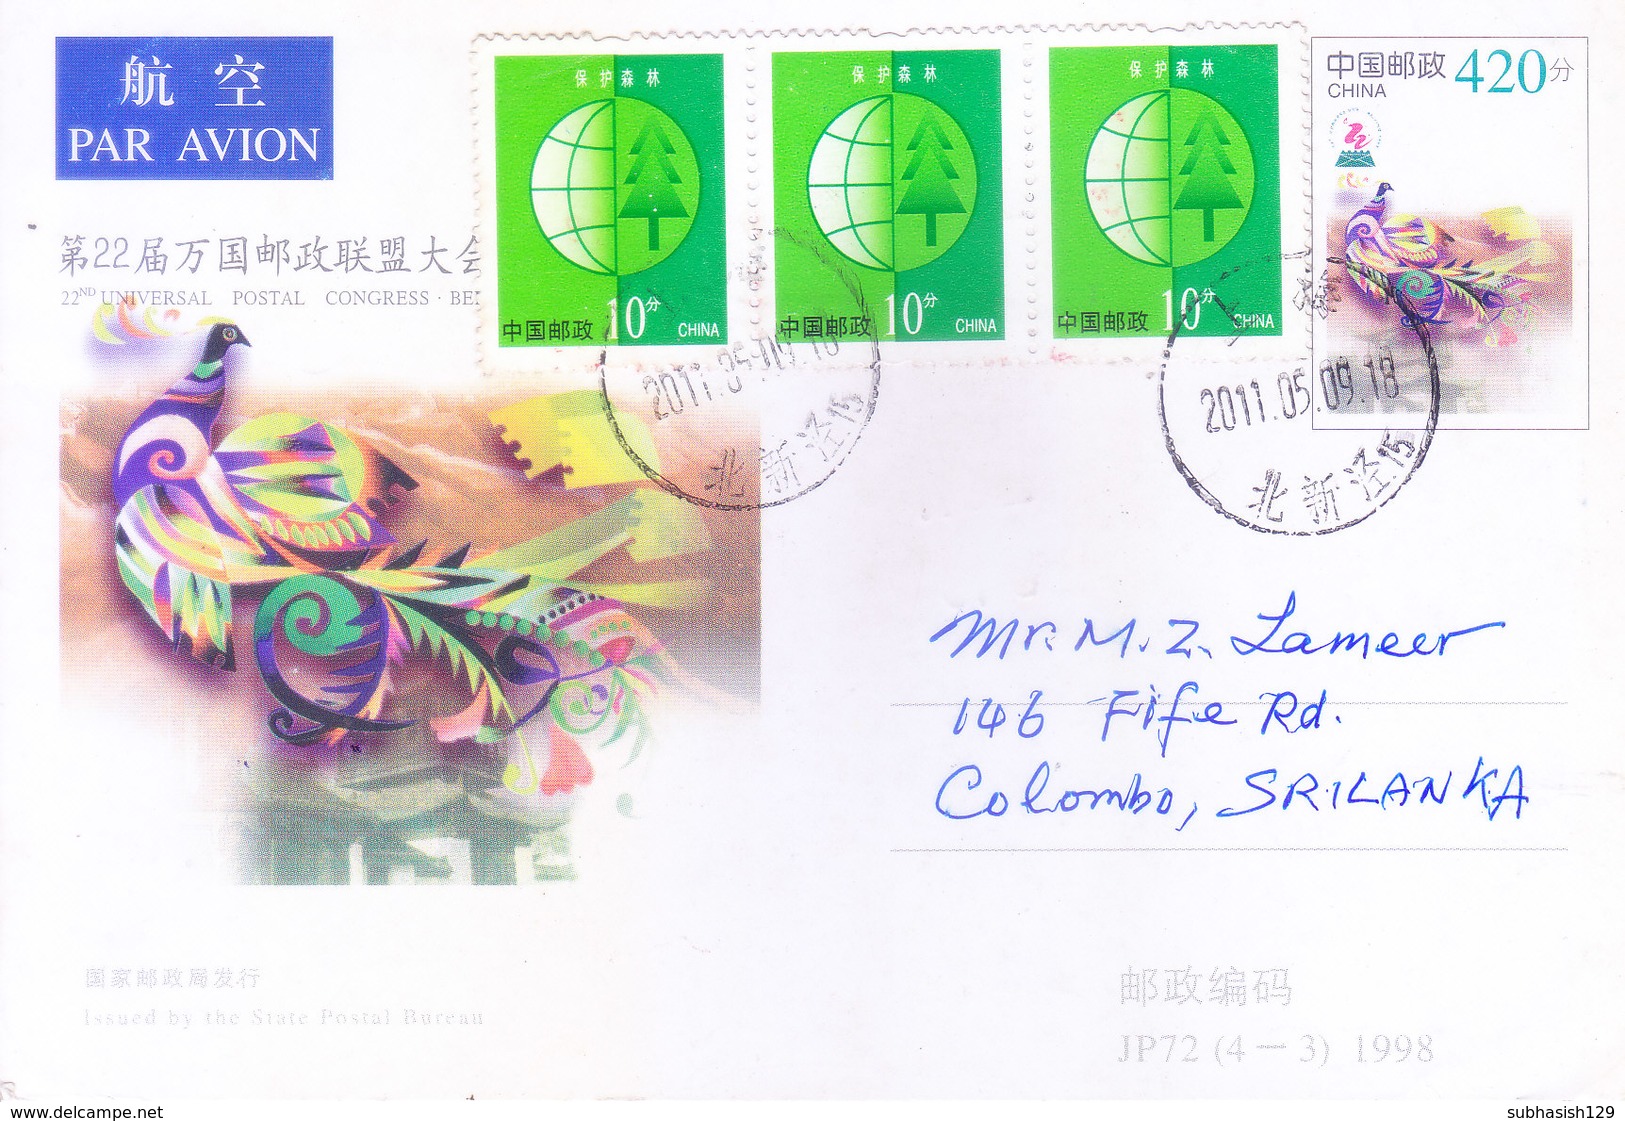 CHINA : SPECIAL ILLUSTRATIVE POST CARD ISSUED ON 22ND UNIVERSAL POSTAL CONGRESS, BEIJING, 1999 : COMMERCIALLY USED - Covers & Documents